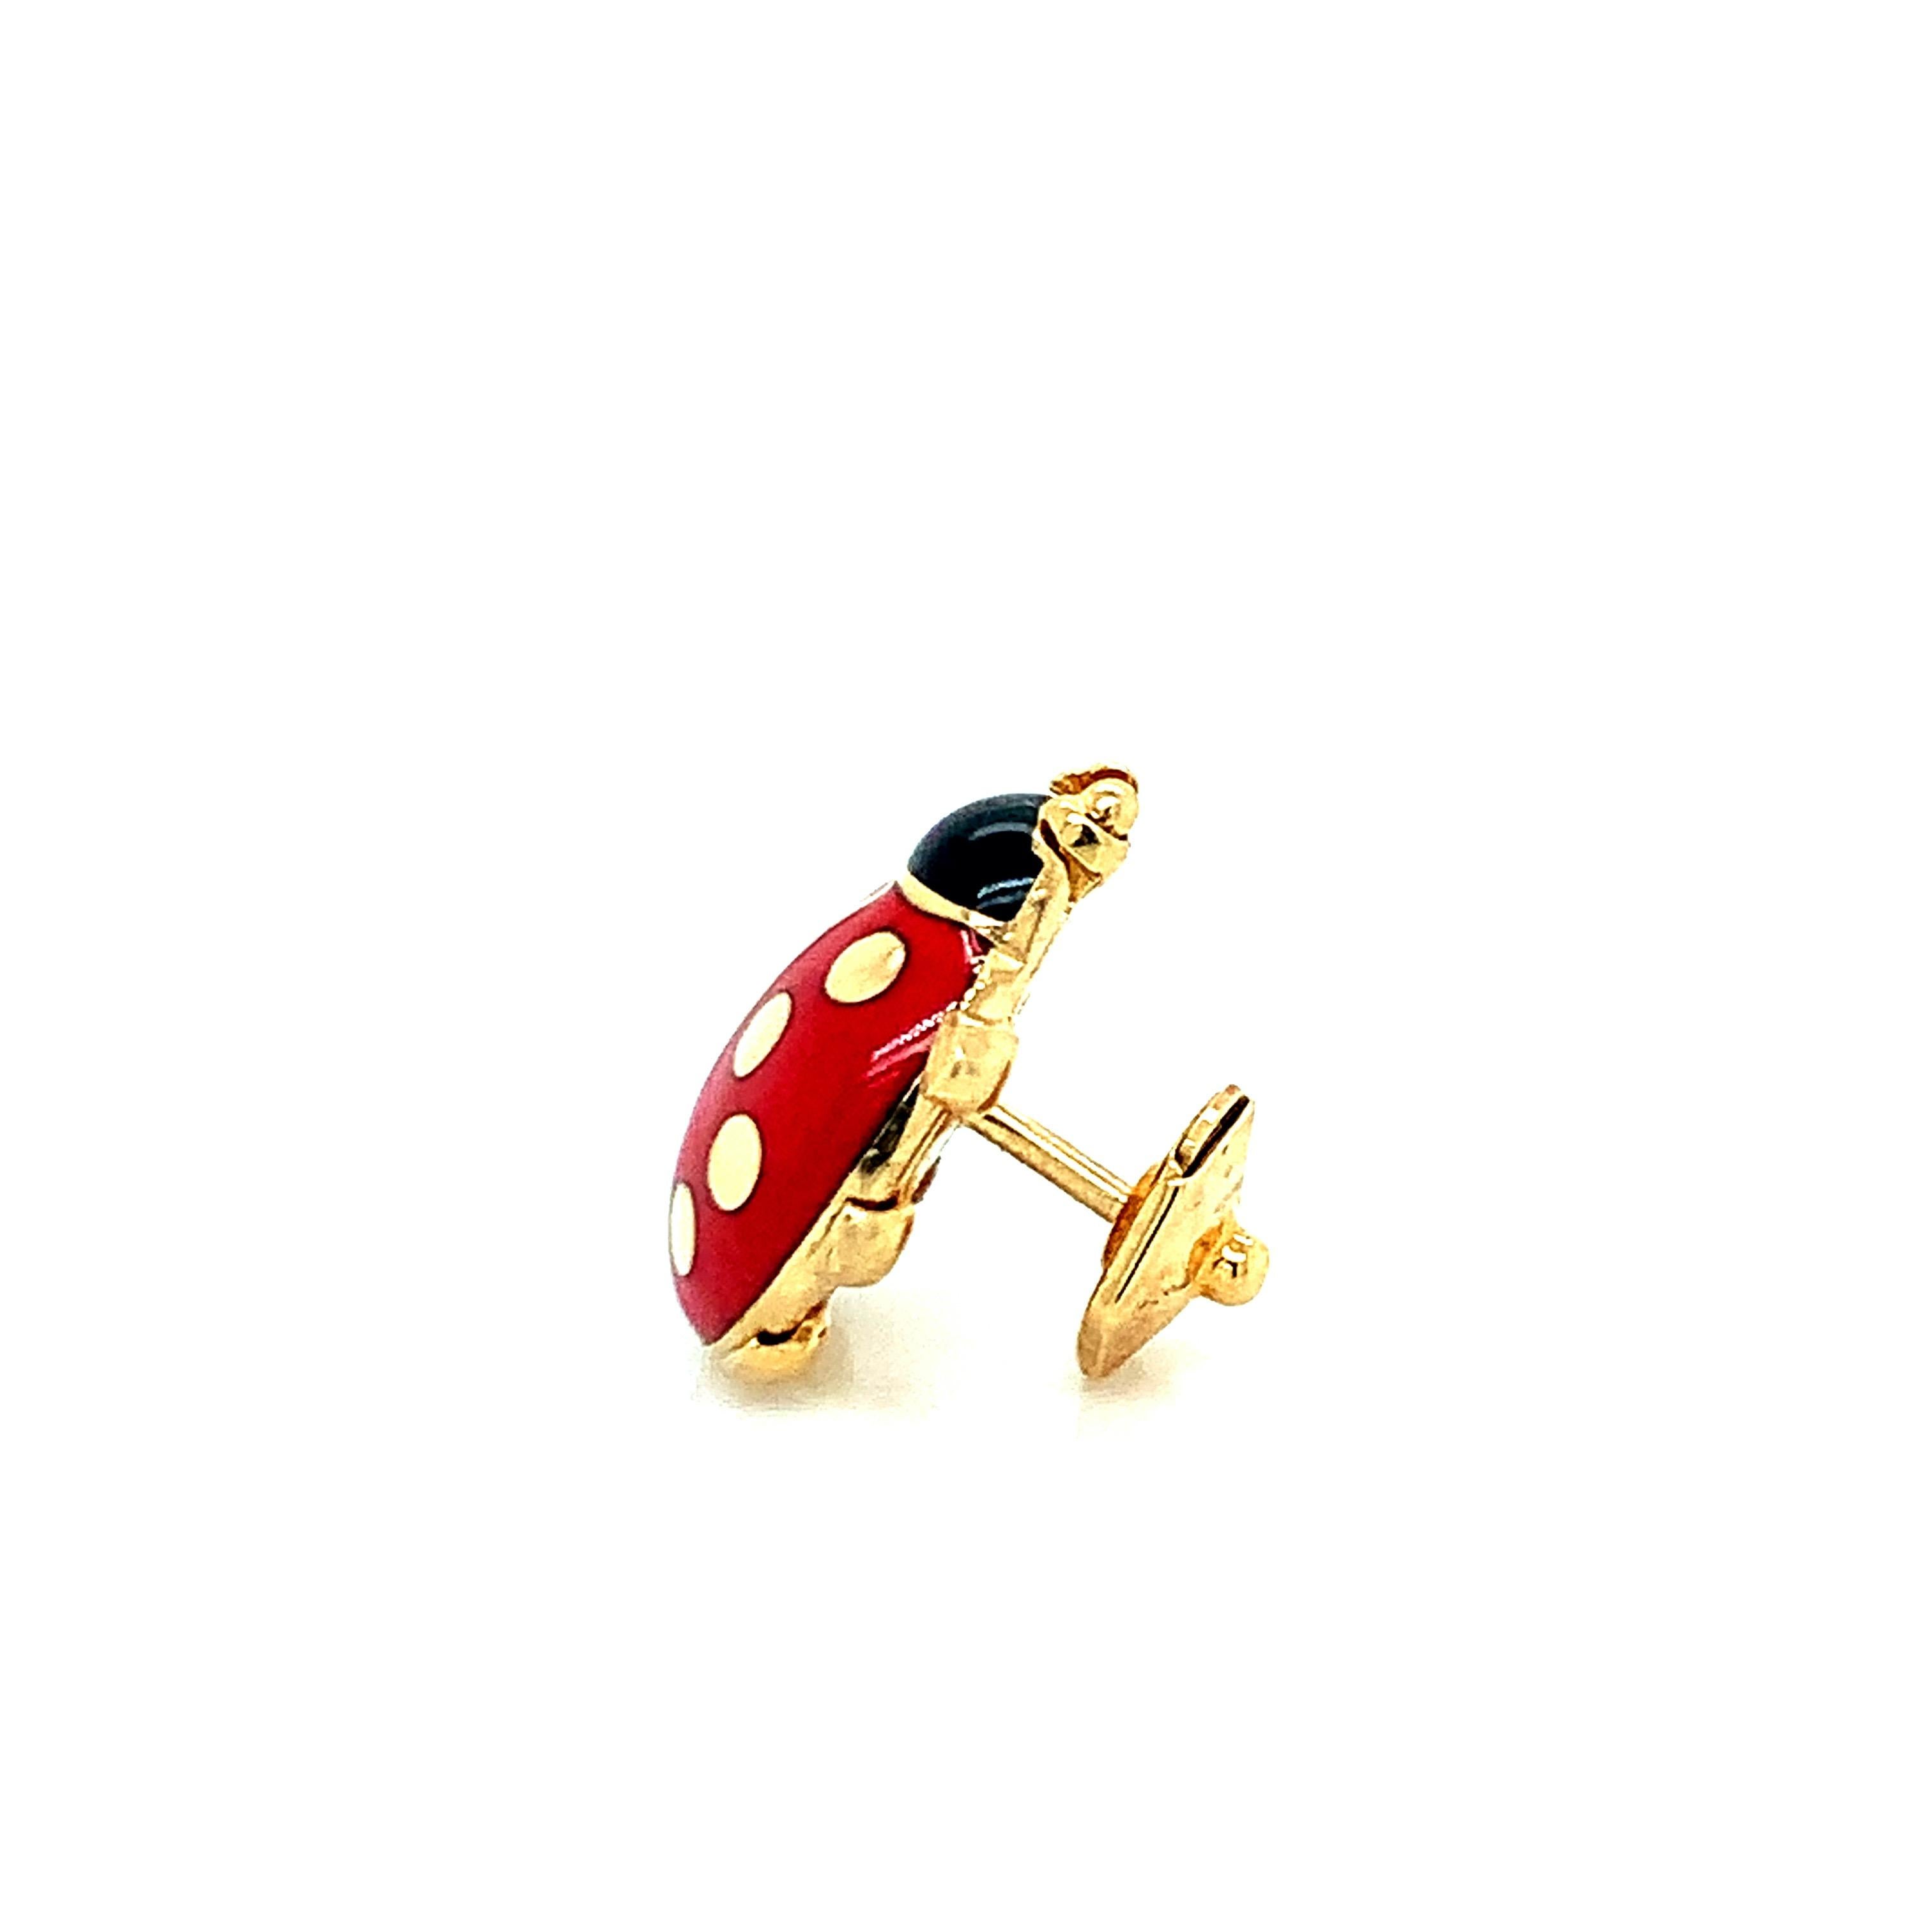 A Cartier creation, this enameled ladybug pin is made out of 18 karat rose gold. Marked Cartier 1990. Total weight: 4.3 grams. Length: 1.7 cm. Width: 1.2 cm. 

Serial No. 997639